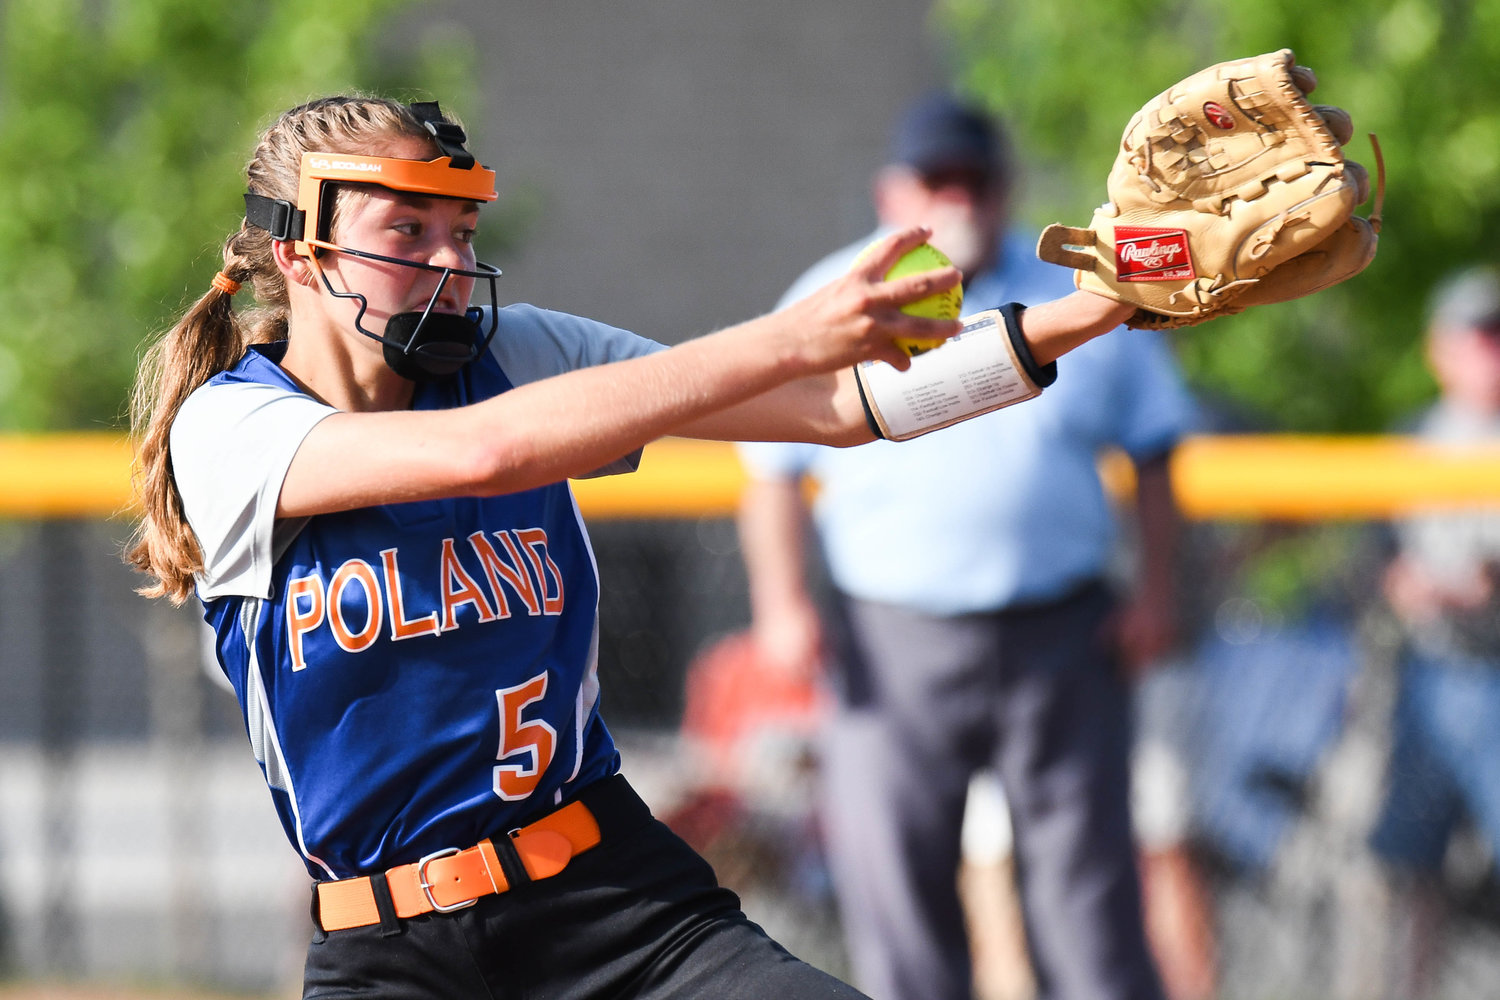 Poland player Shelbi Hagues delivers a pitch during the Section III Class D final against Oriskany on Tuesday at Carrier Park in Syracuse. Oriskany won 5-4.